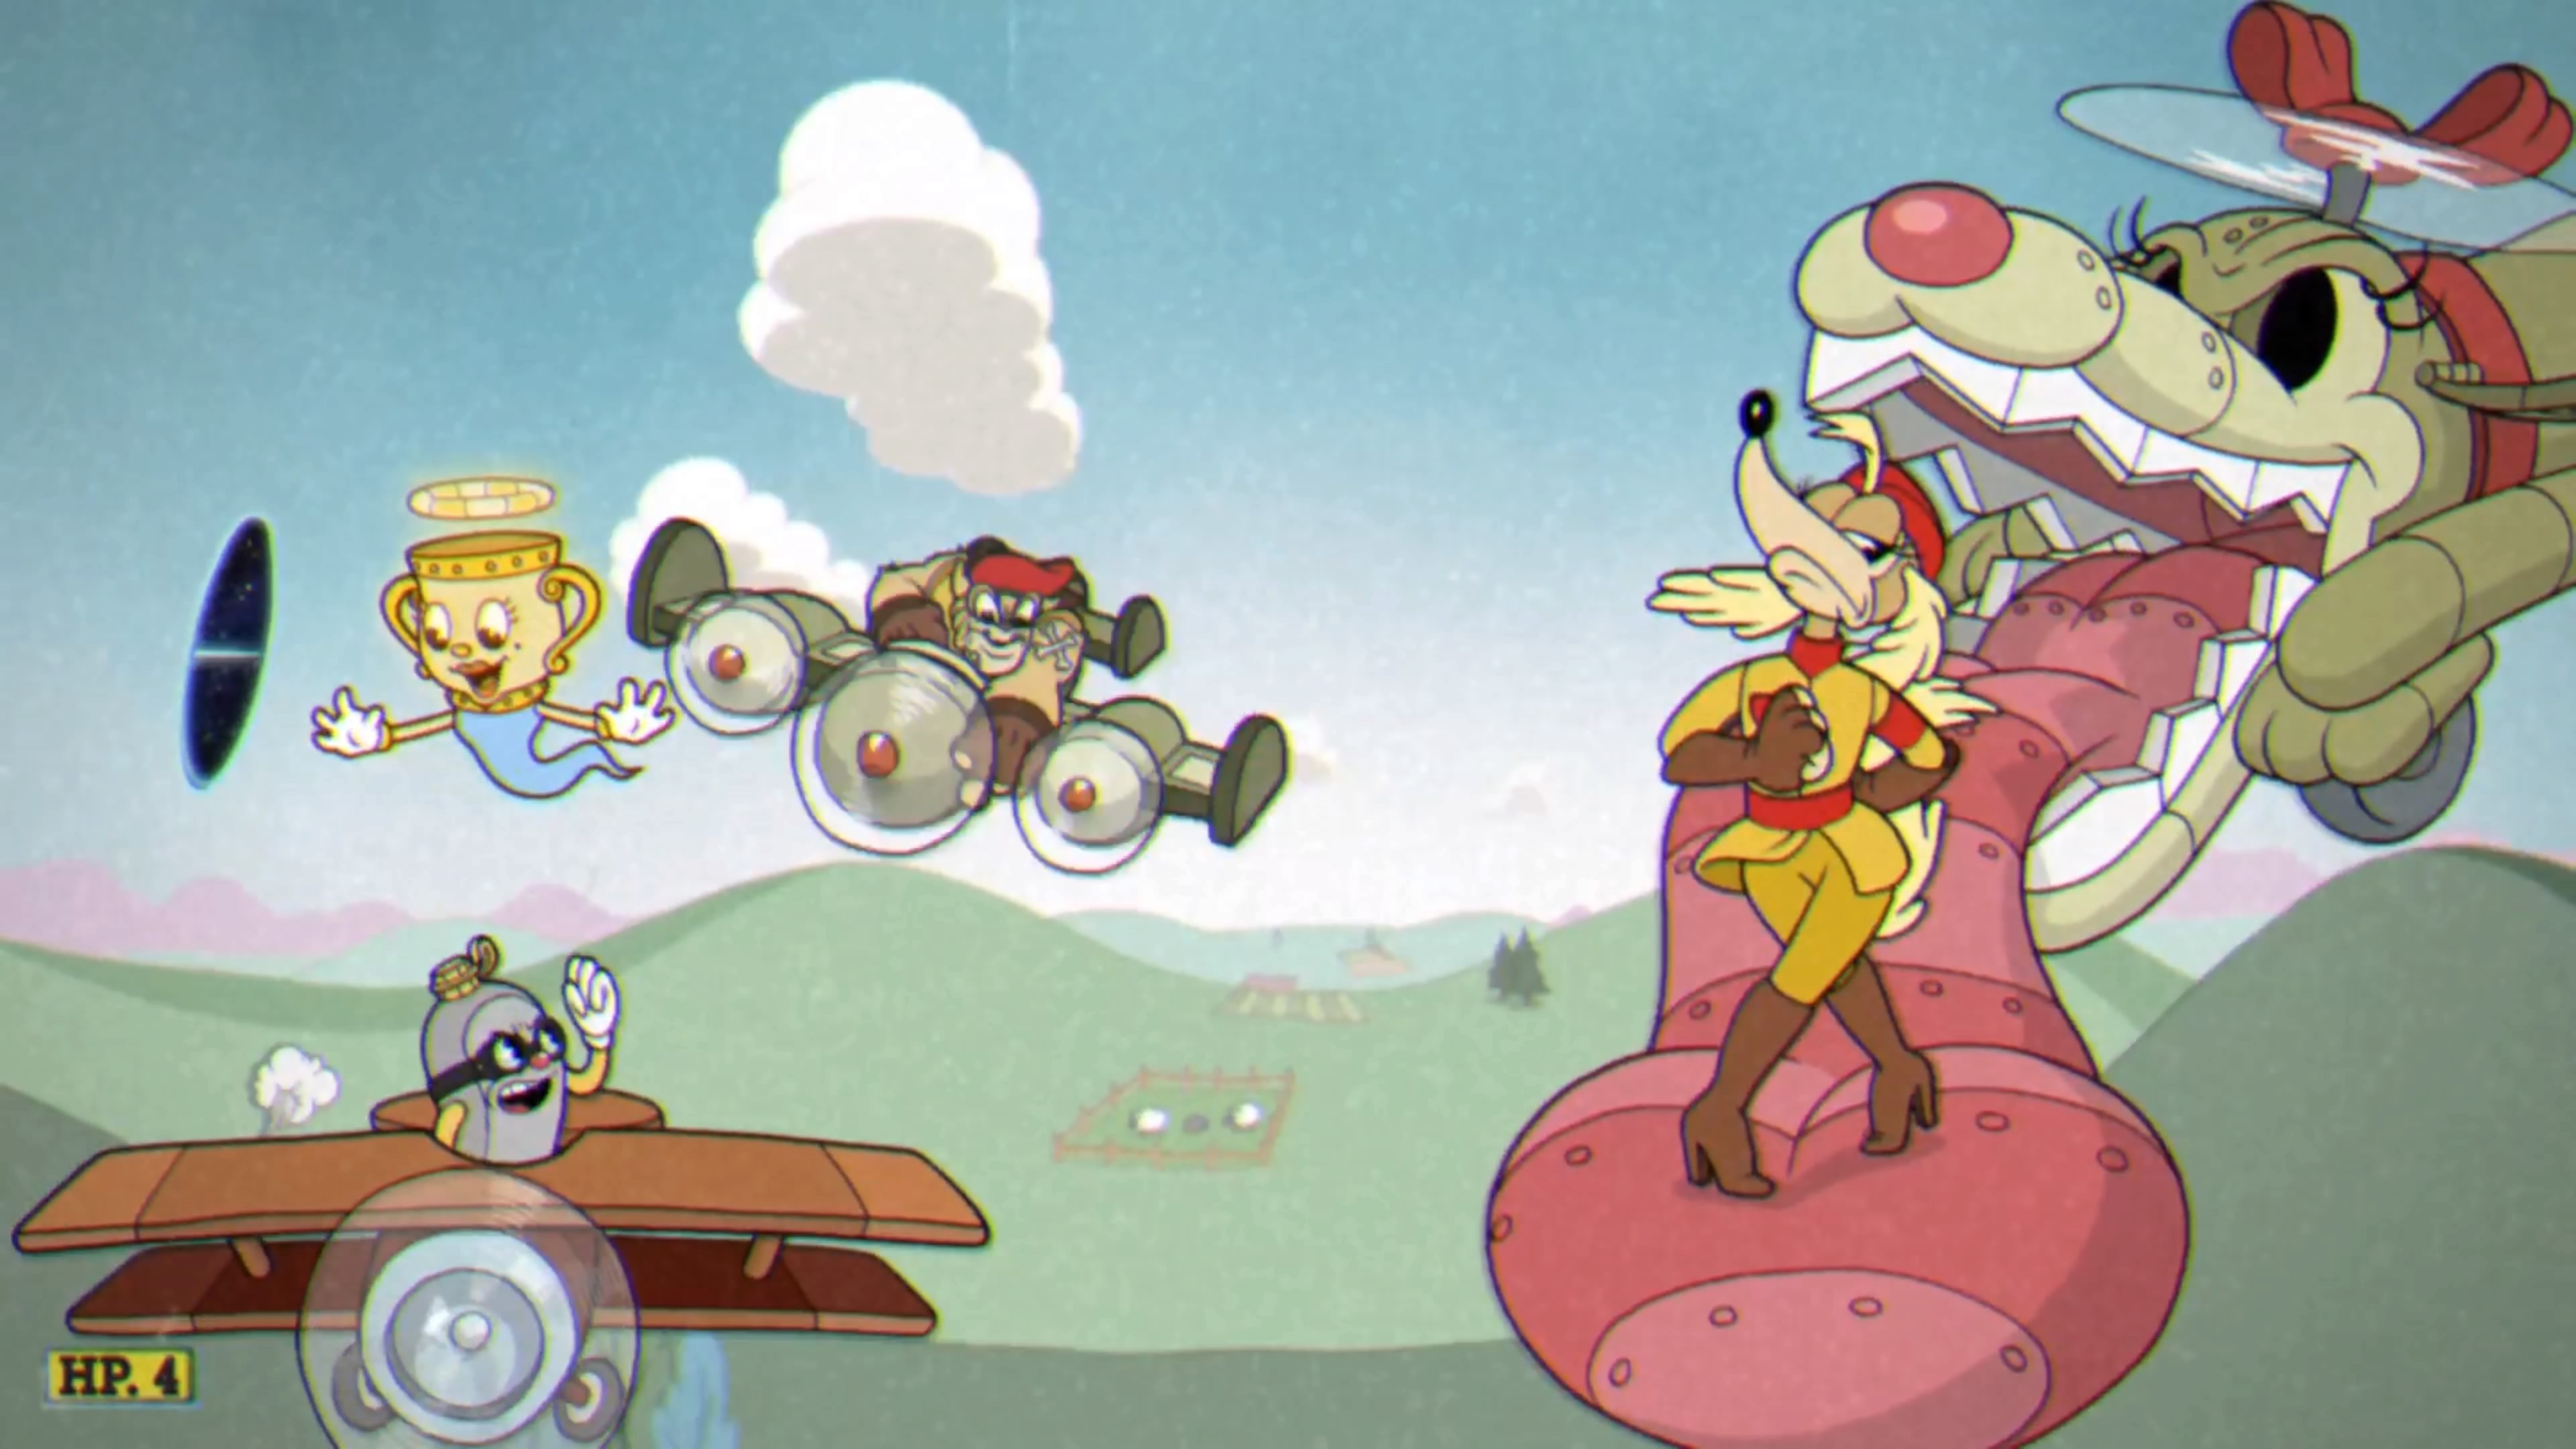 Cuphead - The Delicious Last Course on Steam